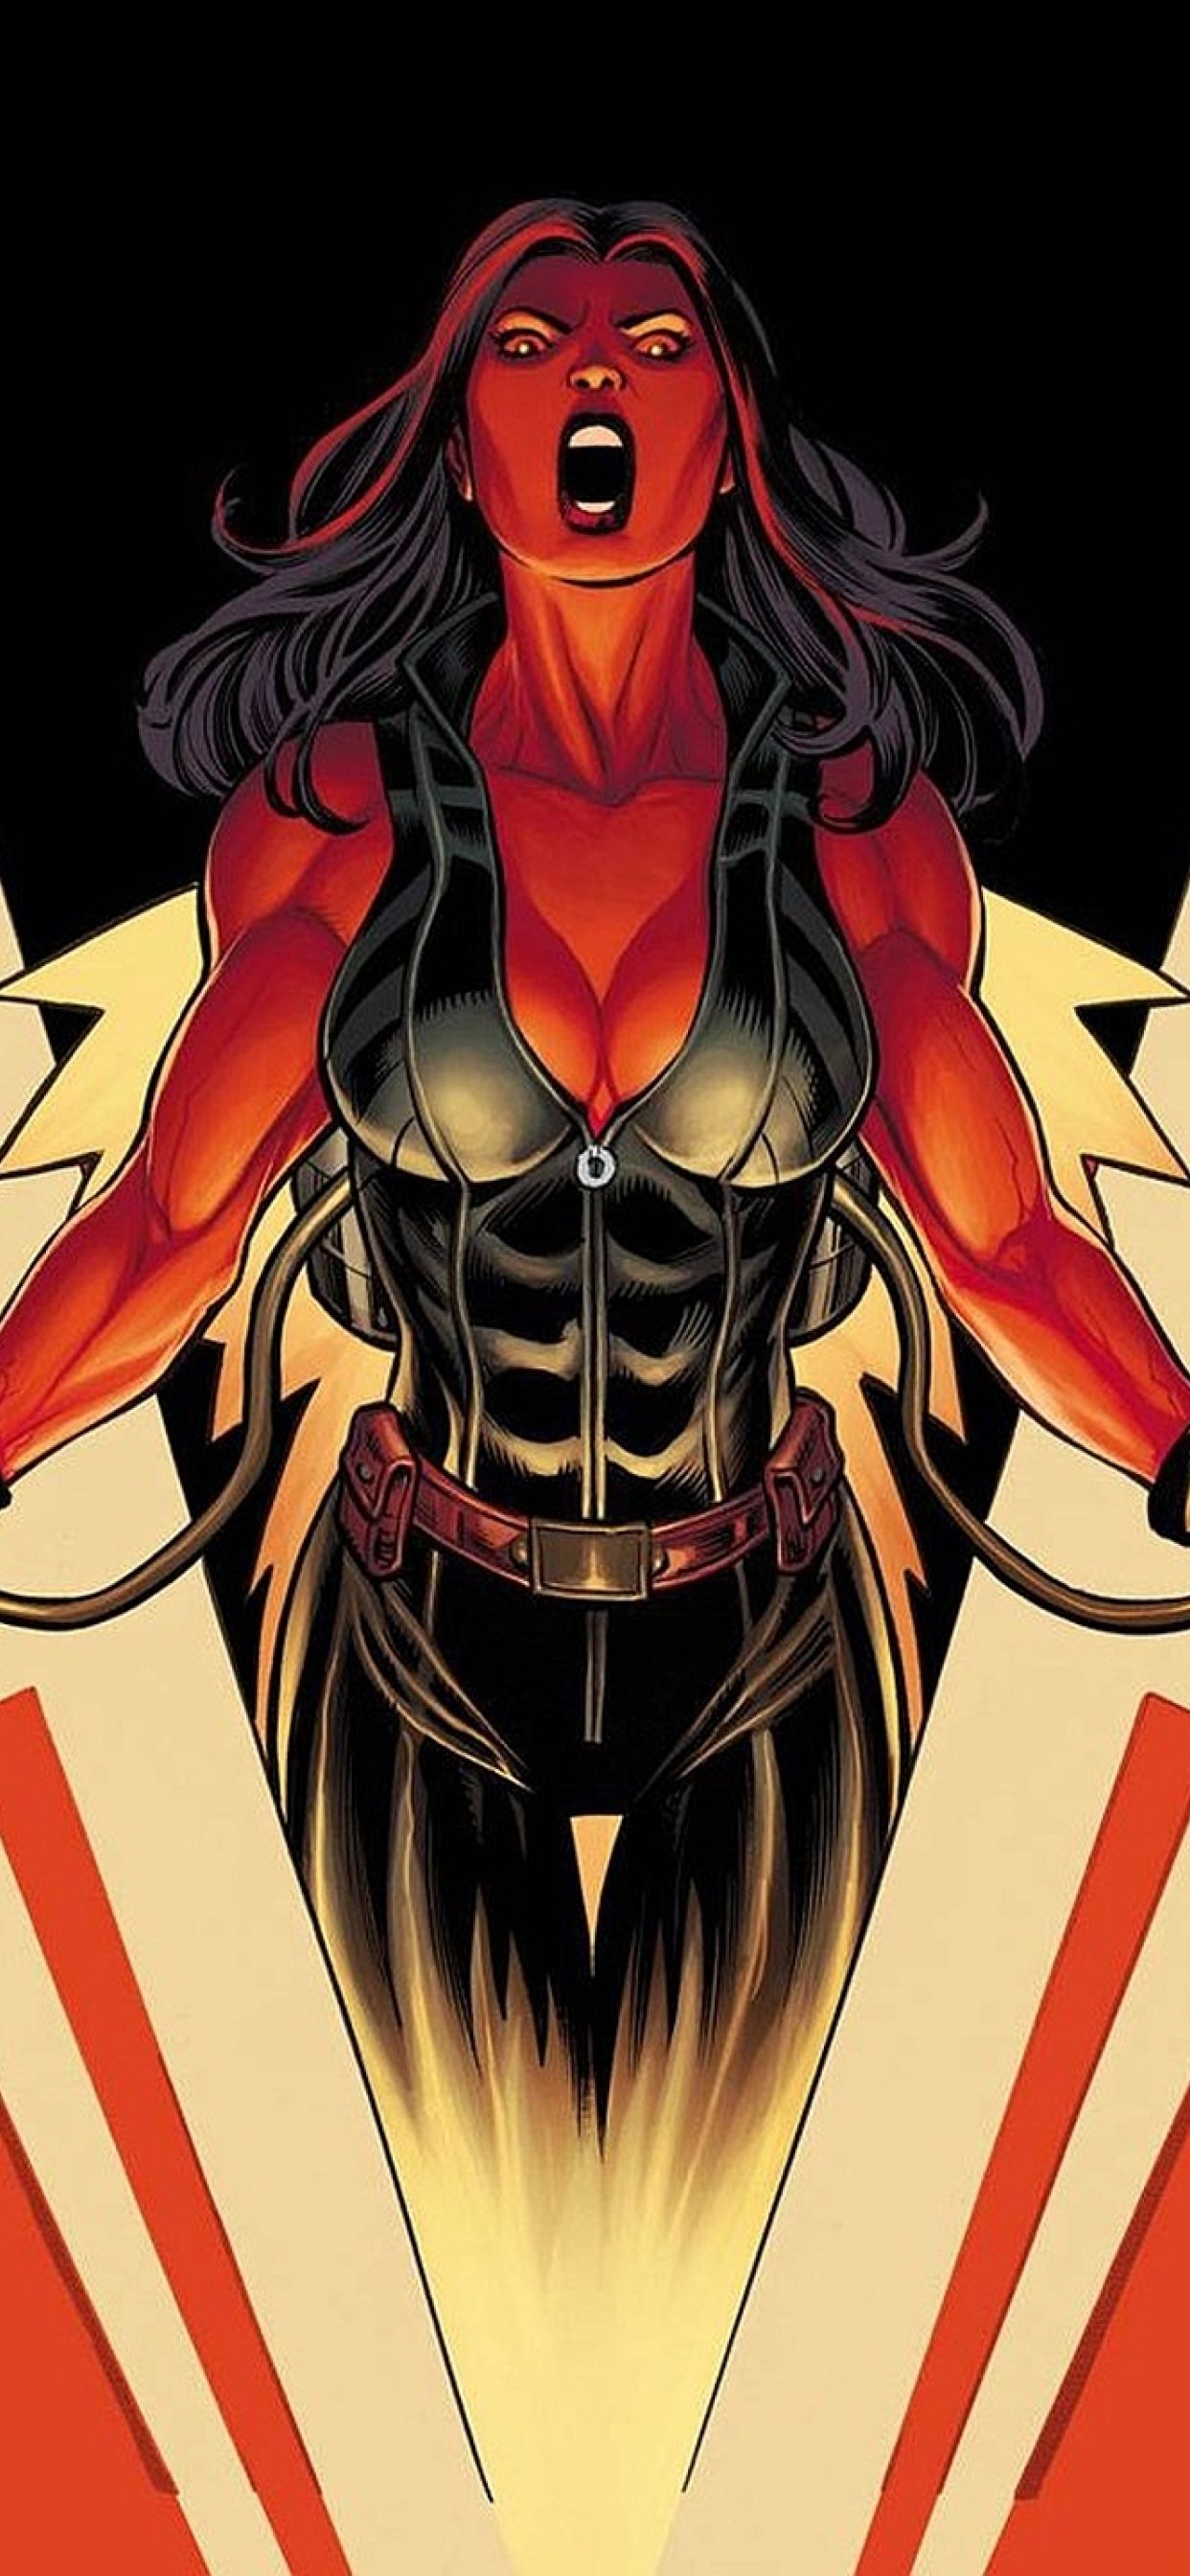 Marvel Red She Hulk IPhone XS MAX Wallpaper, HD Superheroes 4K Wallpaper, Image, Photo And Background